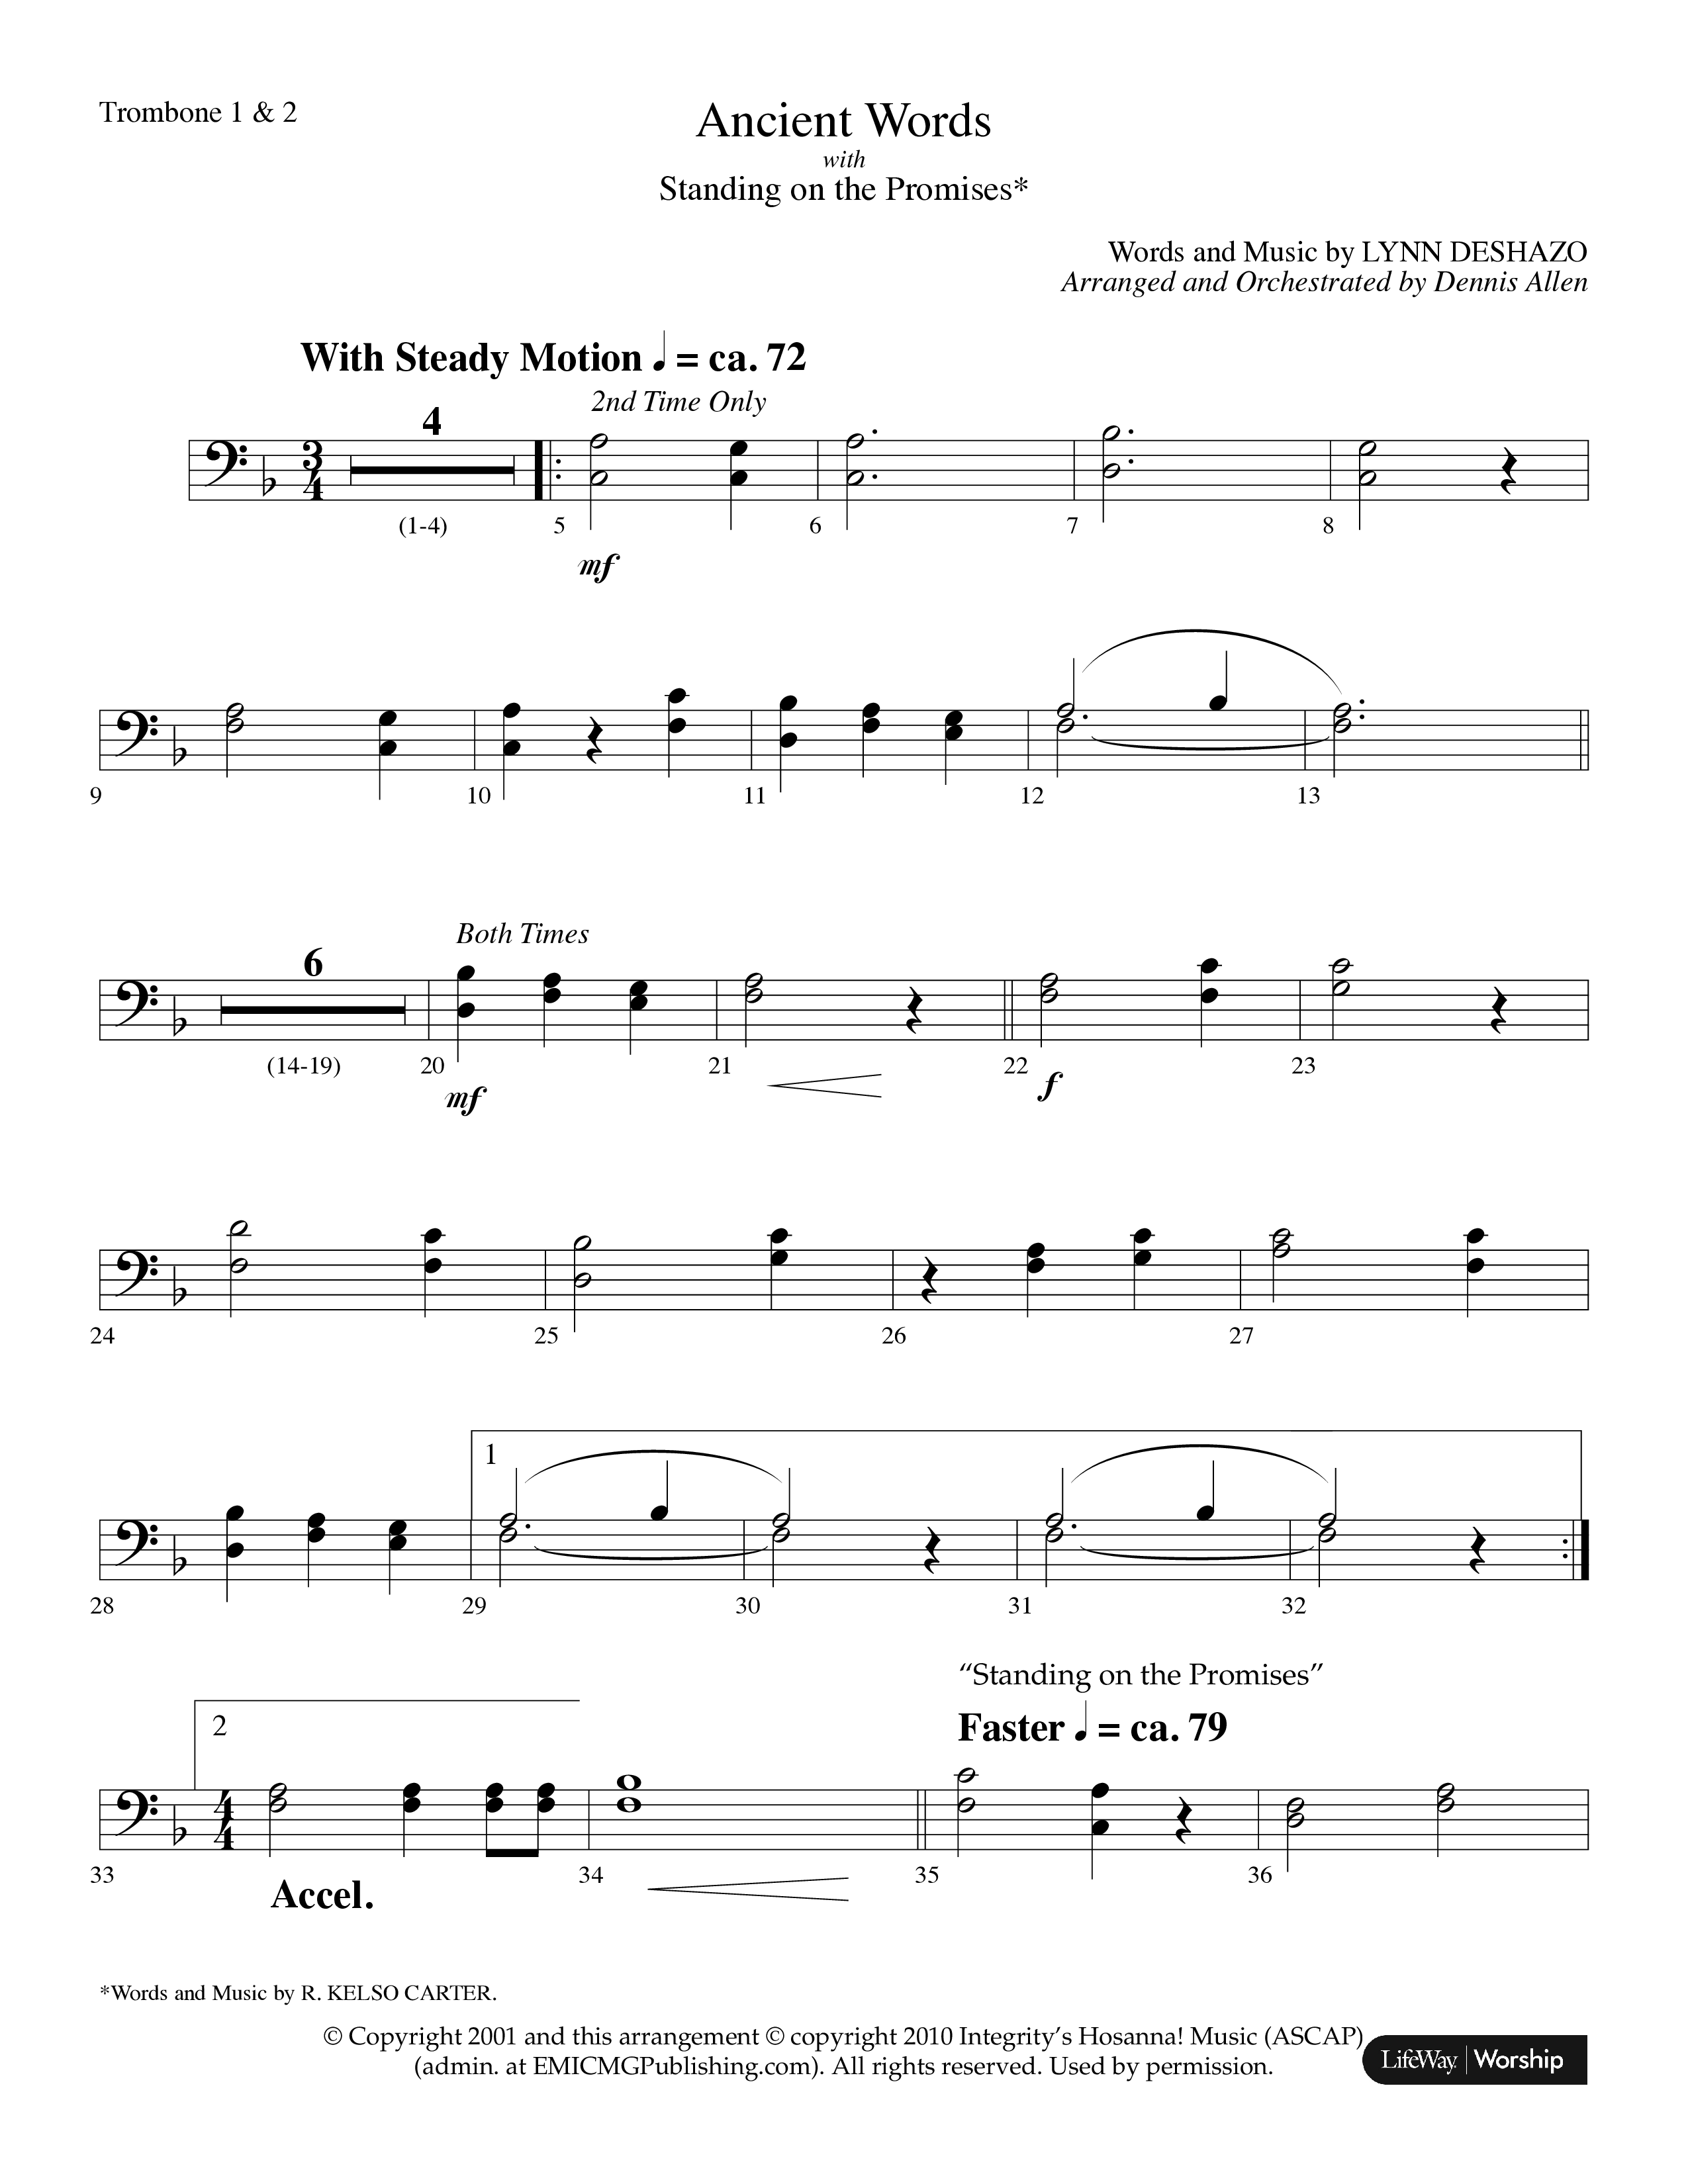 Ancient Words (with Standing On The Promises) (Choral Anthem SATB) Trombone 1/2 (Lifeway Choral / Arr. Dennis Allen)